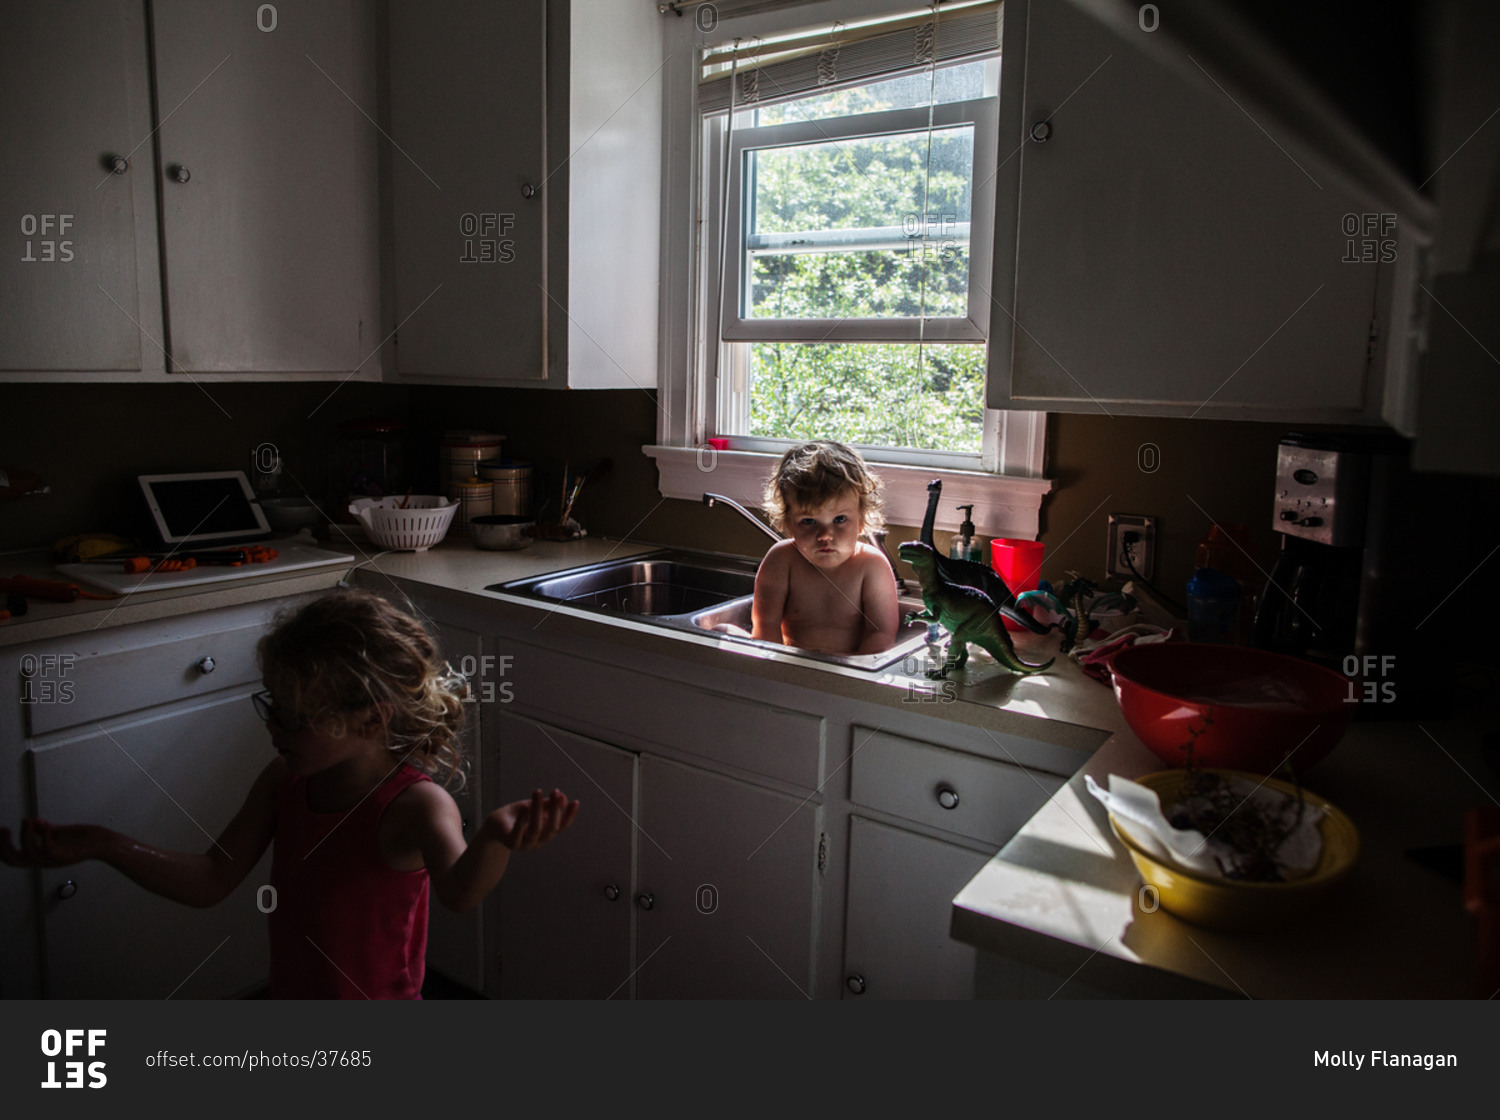 a child takes a bath in kitchen sink while a child dances